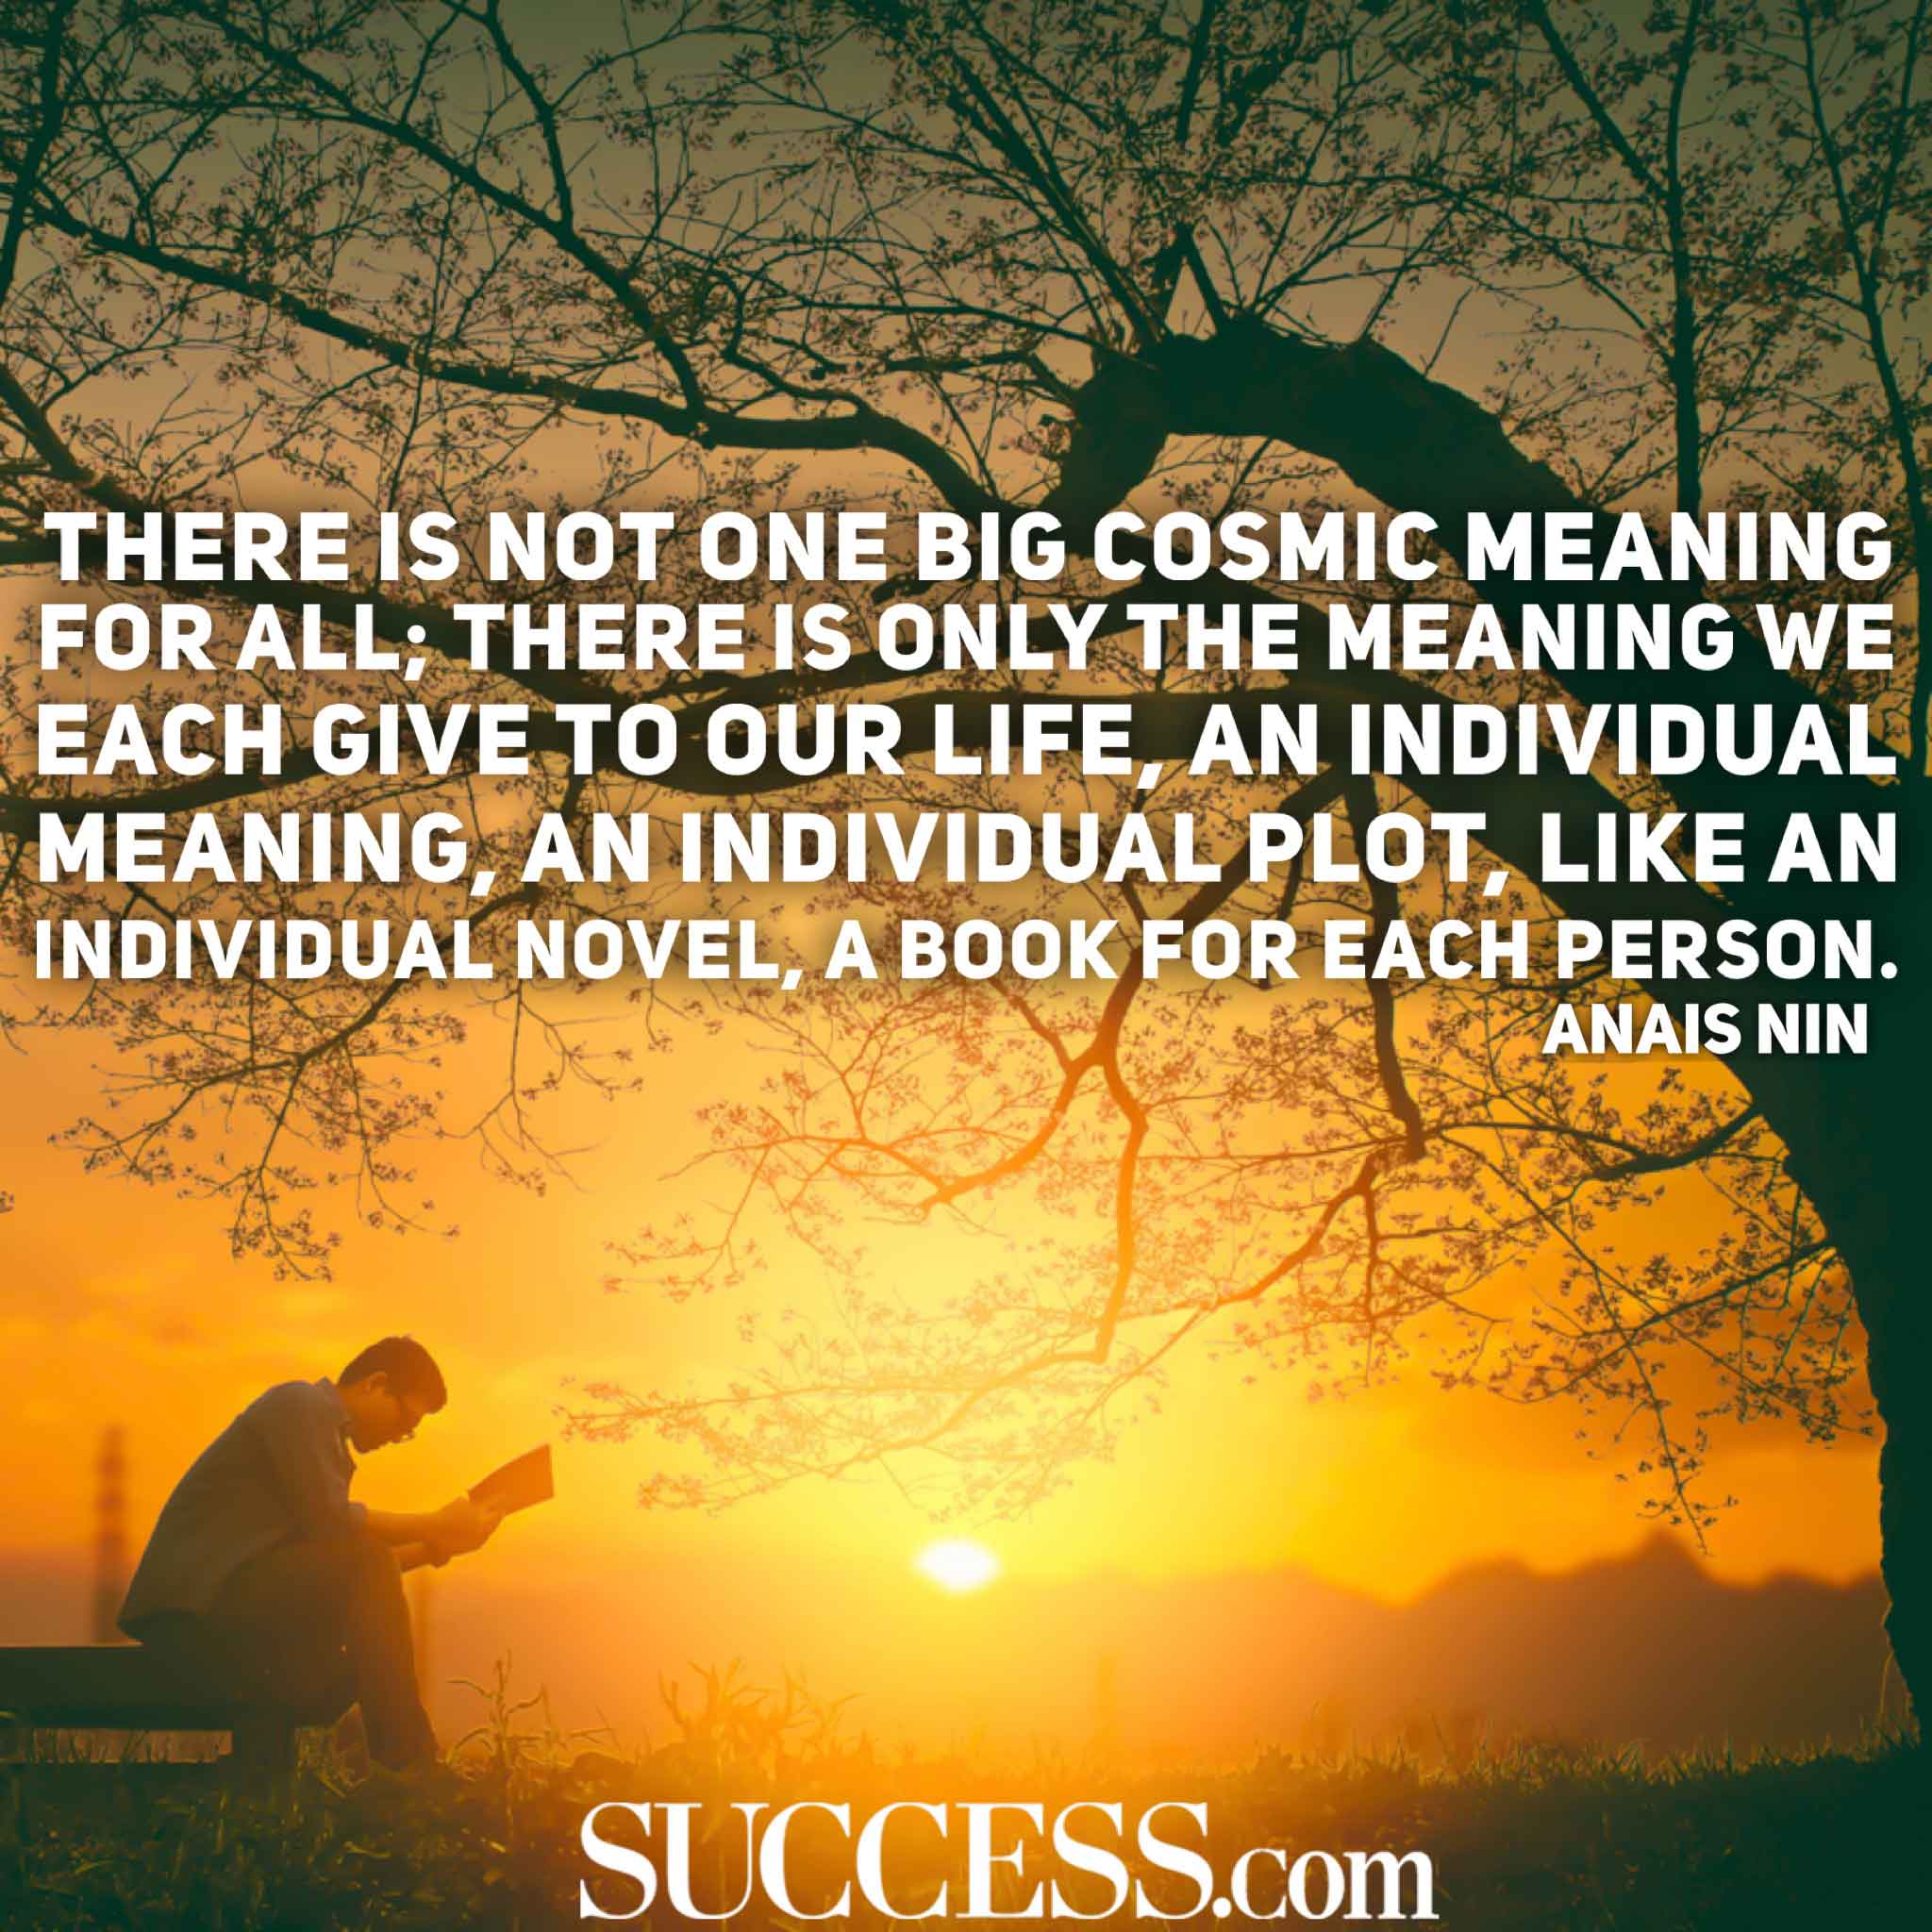 The Meaning of Life in 15 Wise Quotes